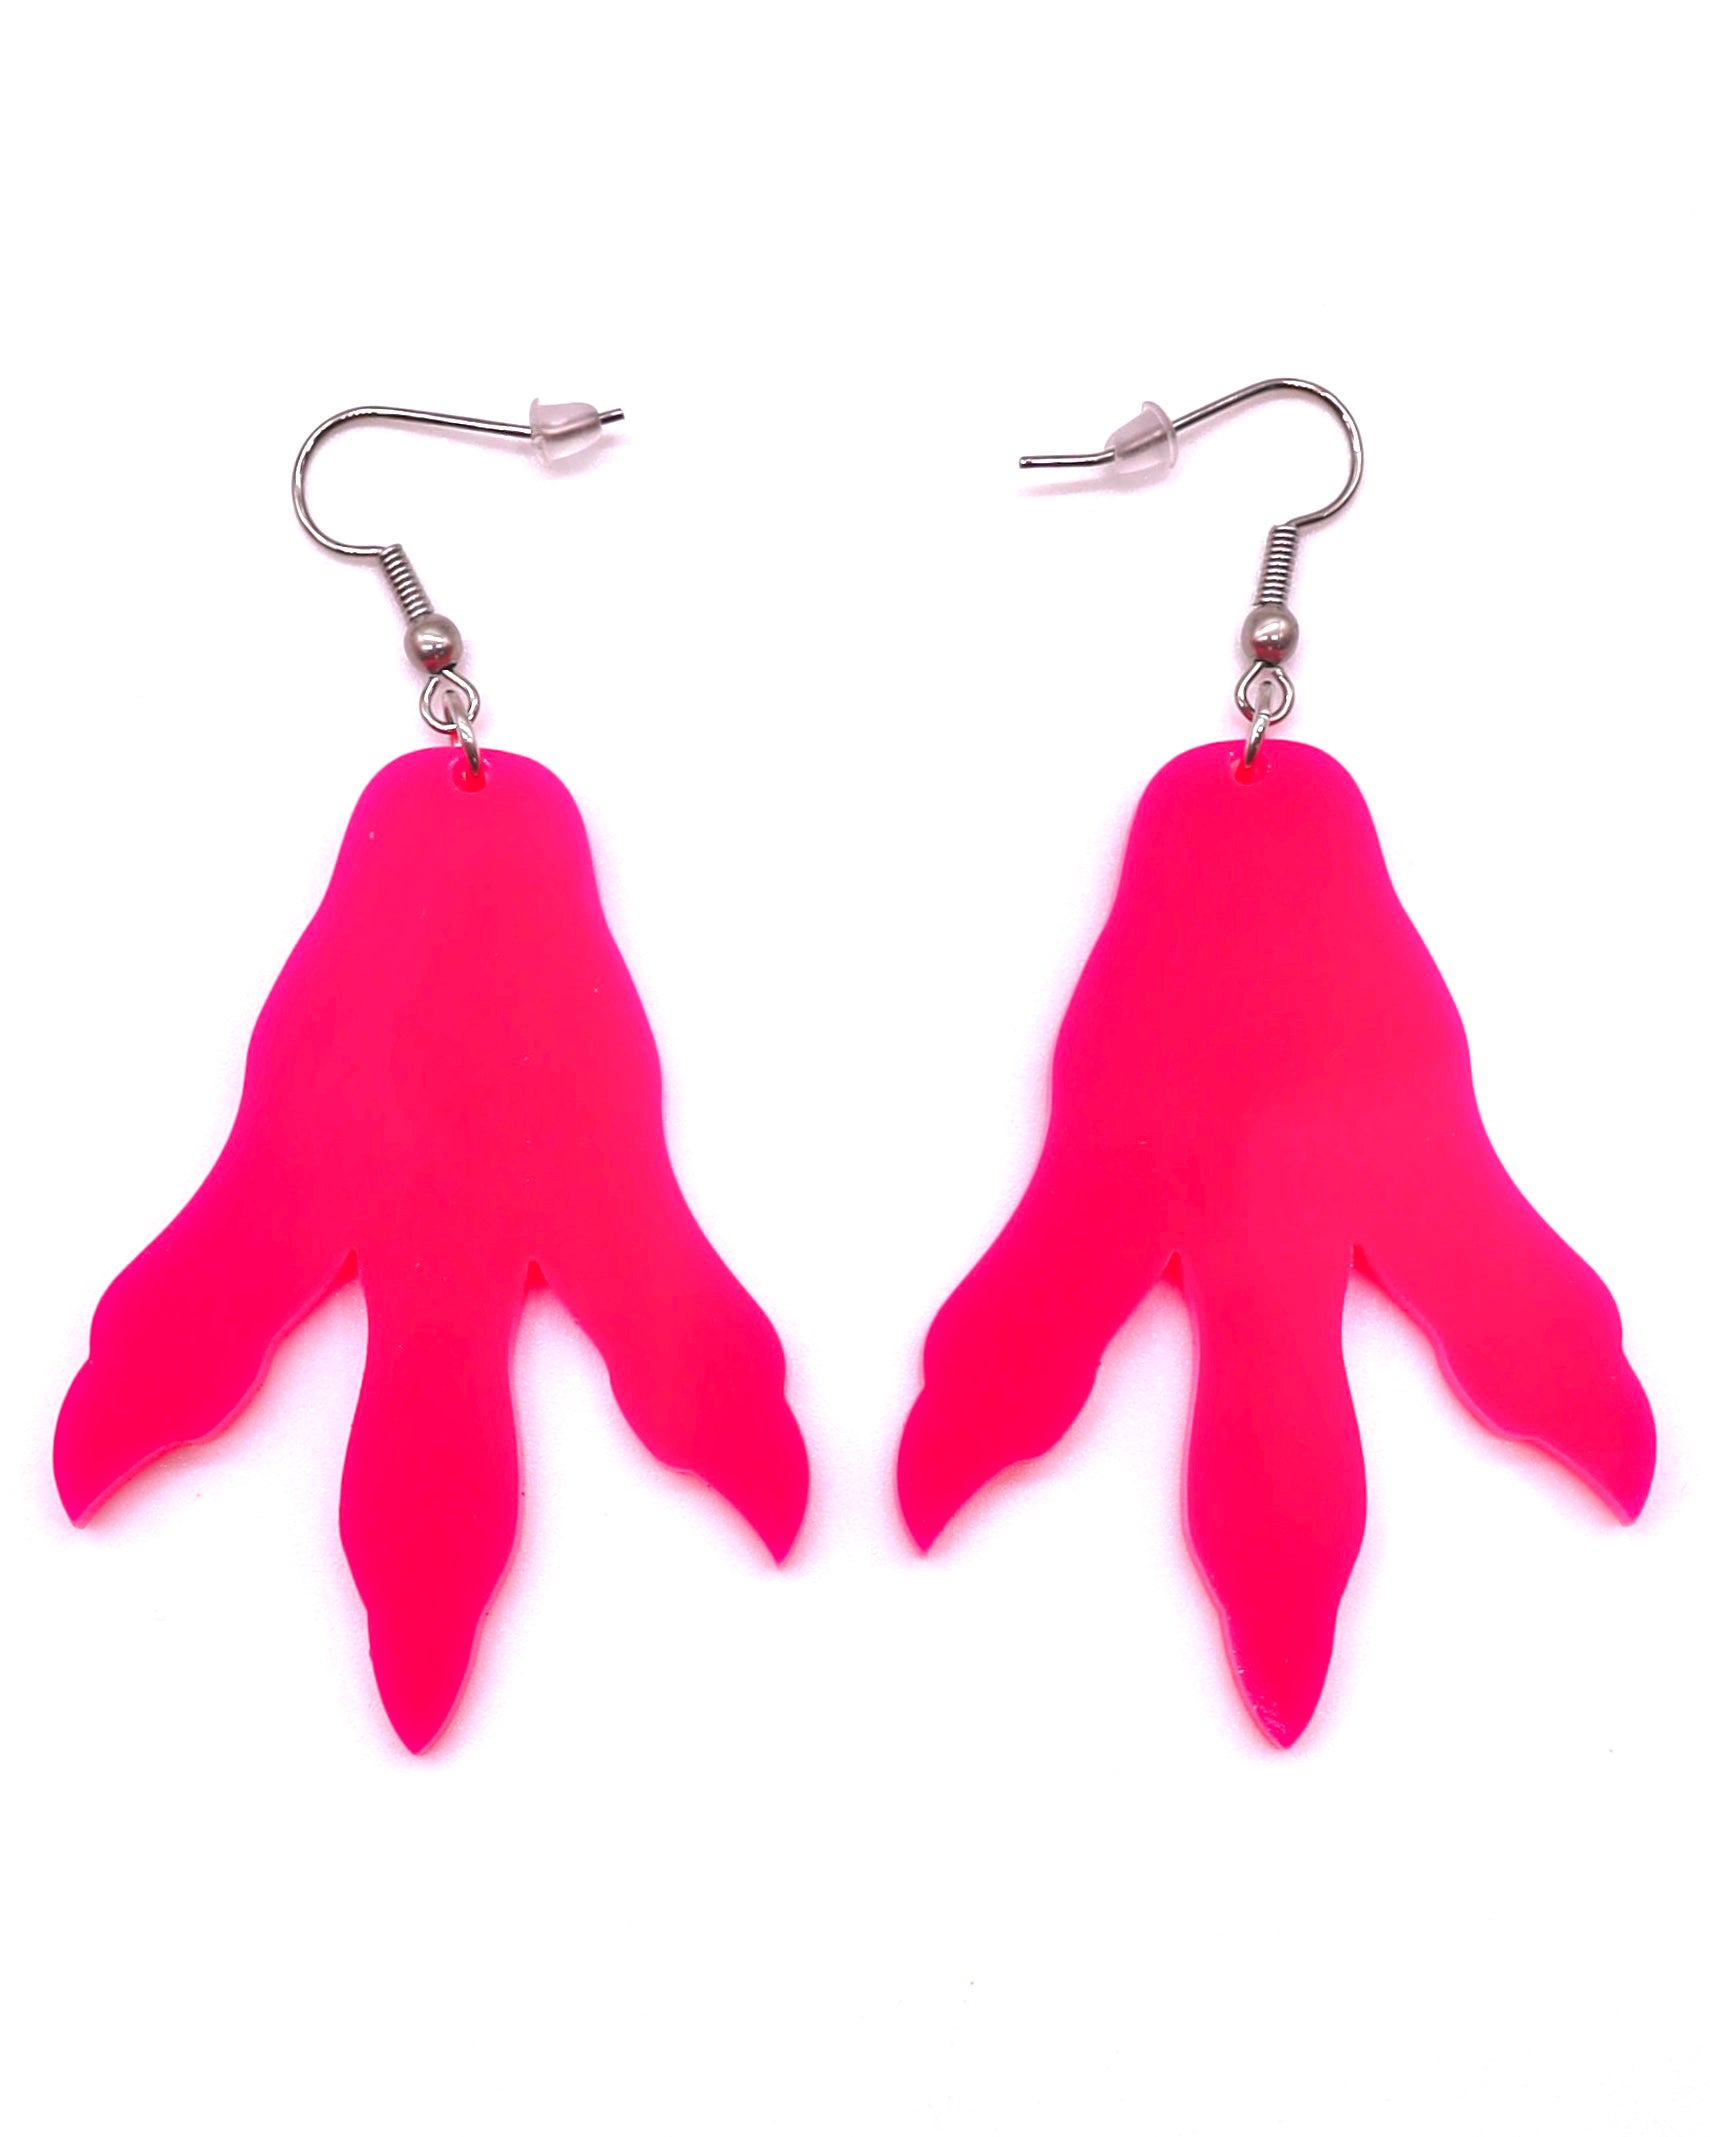 Dino Print Earrings in Hot Pink - Make a Roaring Statement at Your Next Festival